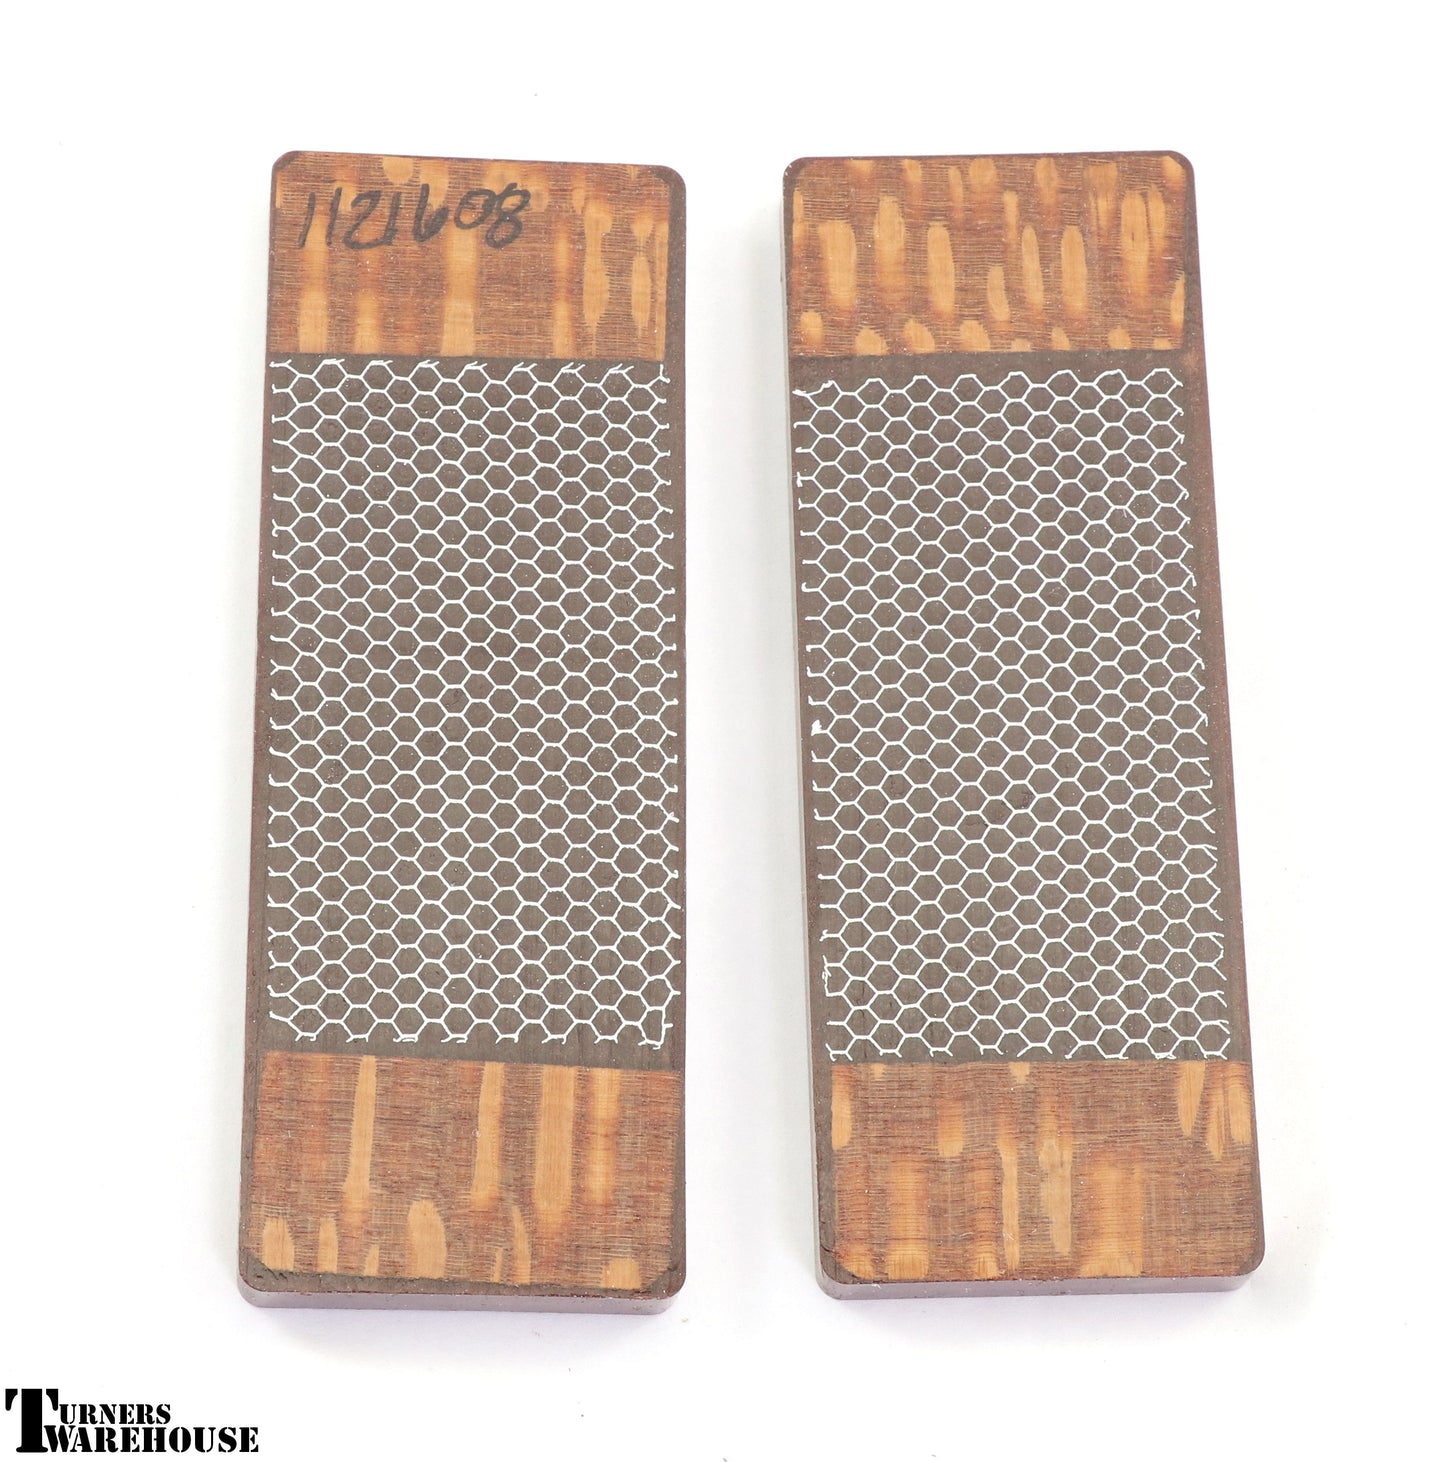 Top Choice - Honeycomb Knife Scales